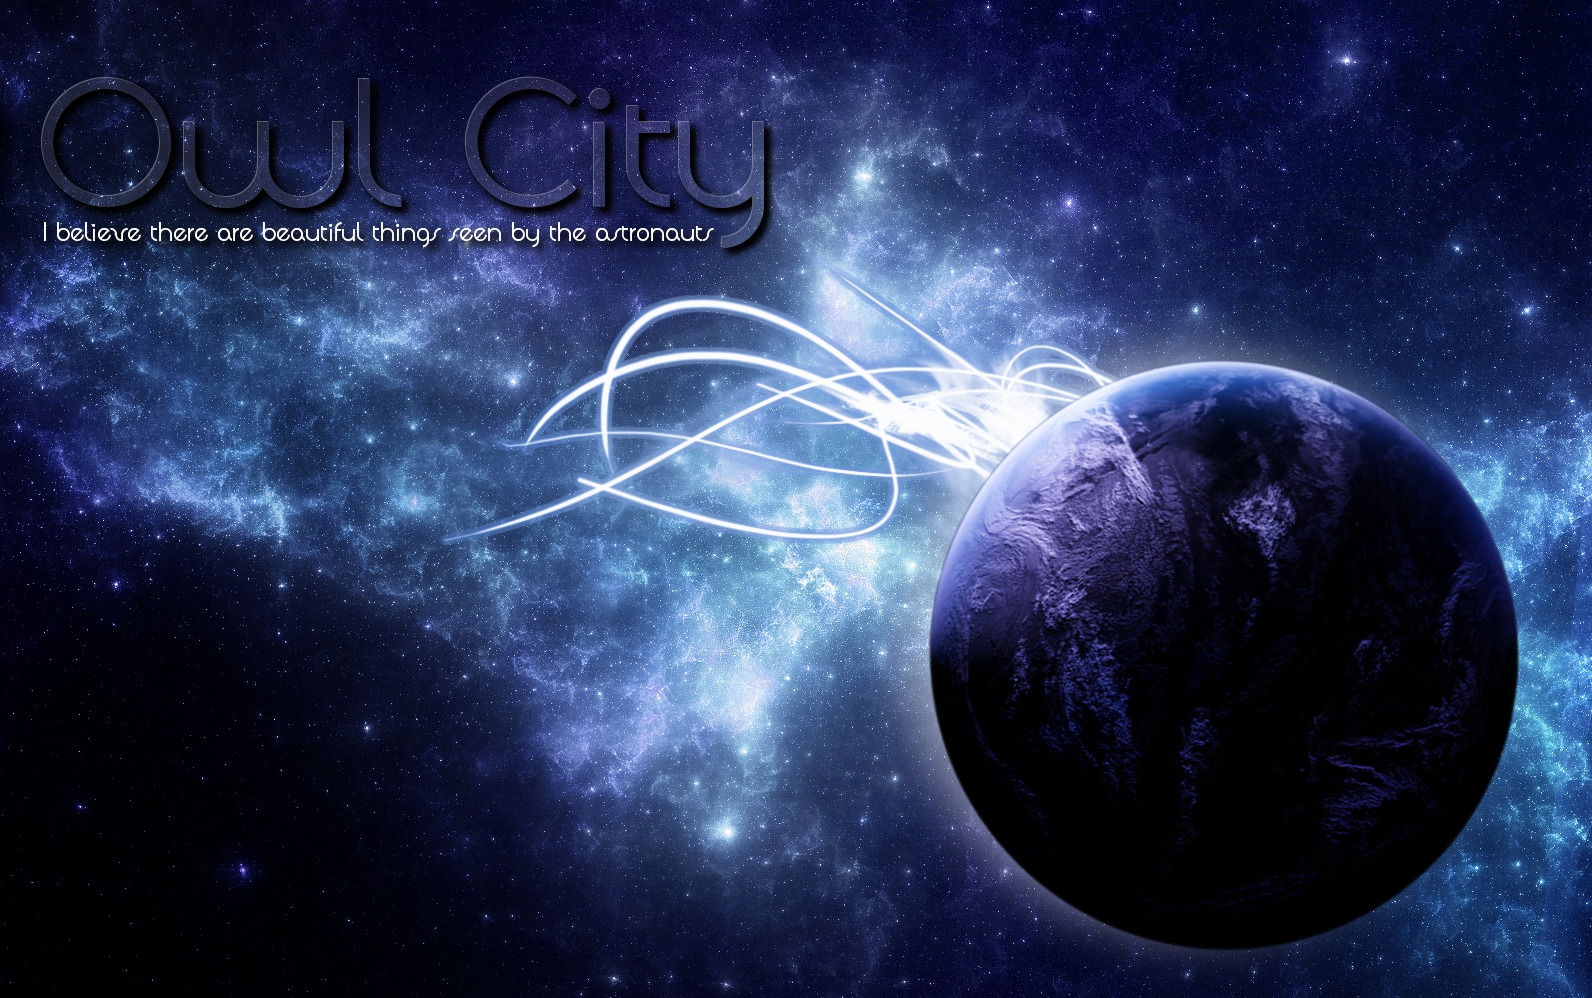 HD Wallpaper Owl City Galaxy By Breakingchattanooga Dos